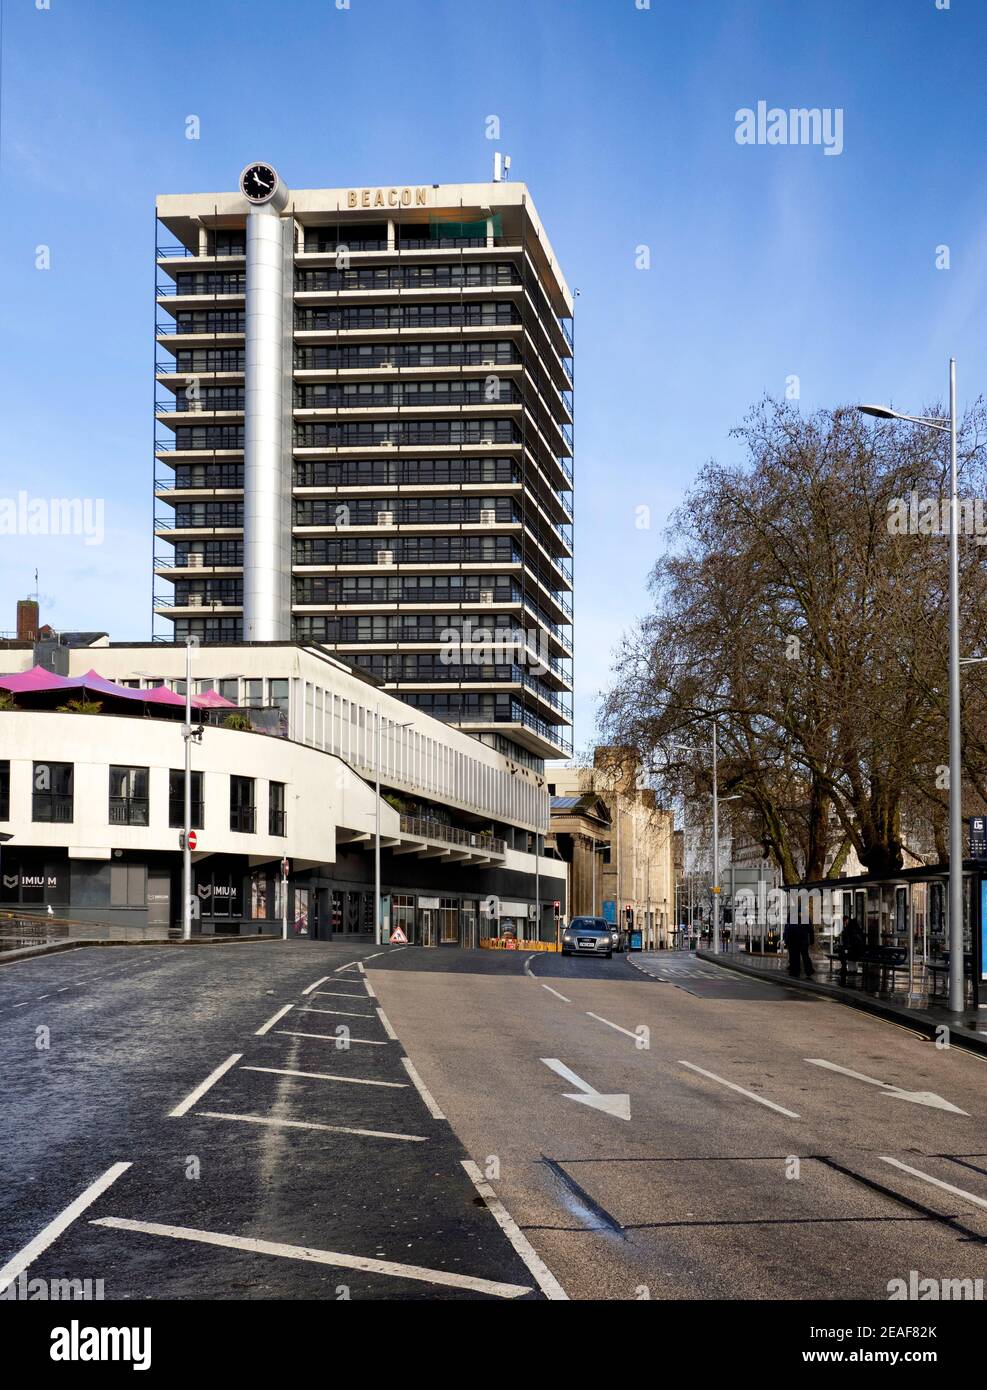 The old Colston Tower in central Bristol changing its name to Beacon Tower after controversial demise of Edward Colston's statue in 2020 Stock Photo